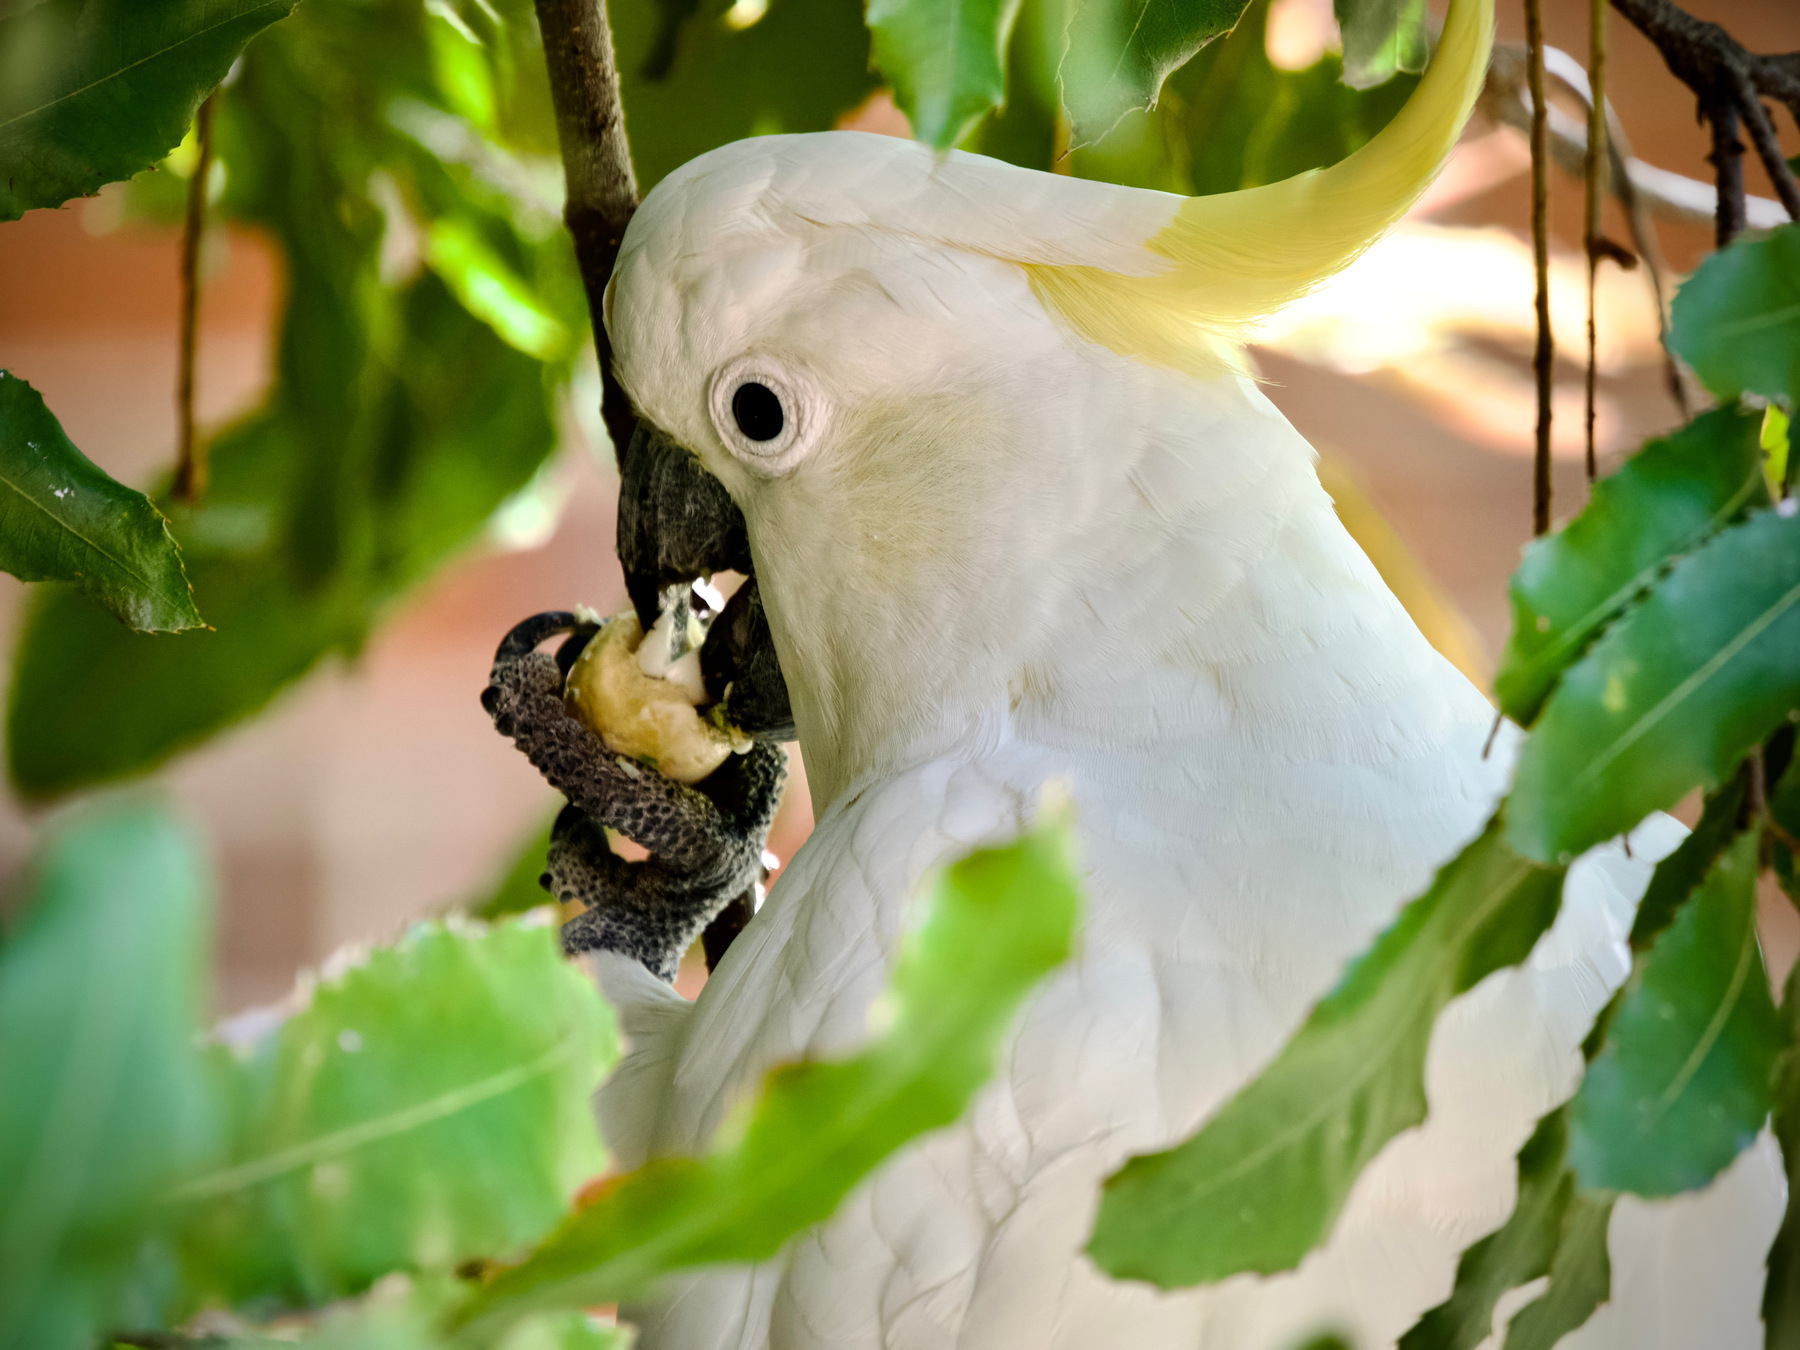 A cockatoo holds a macadamia nut with its foot and cracks it open with its beak.